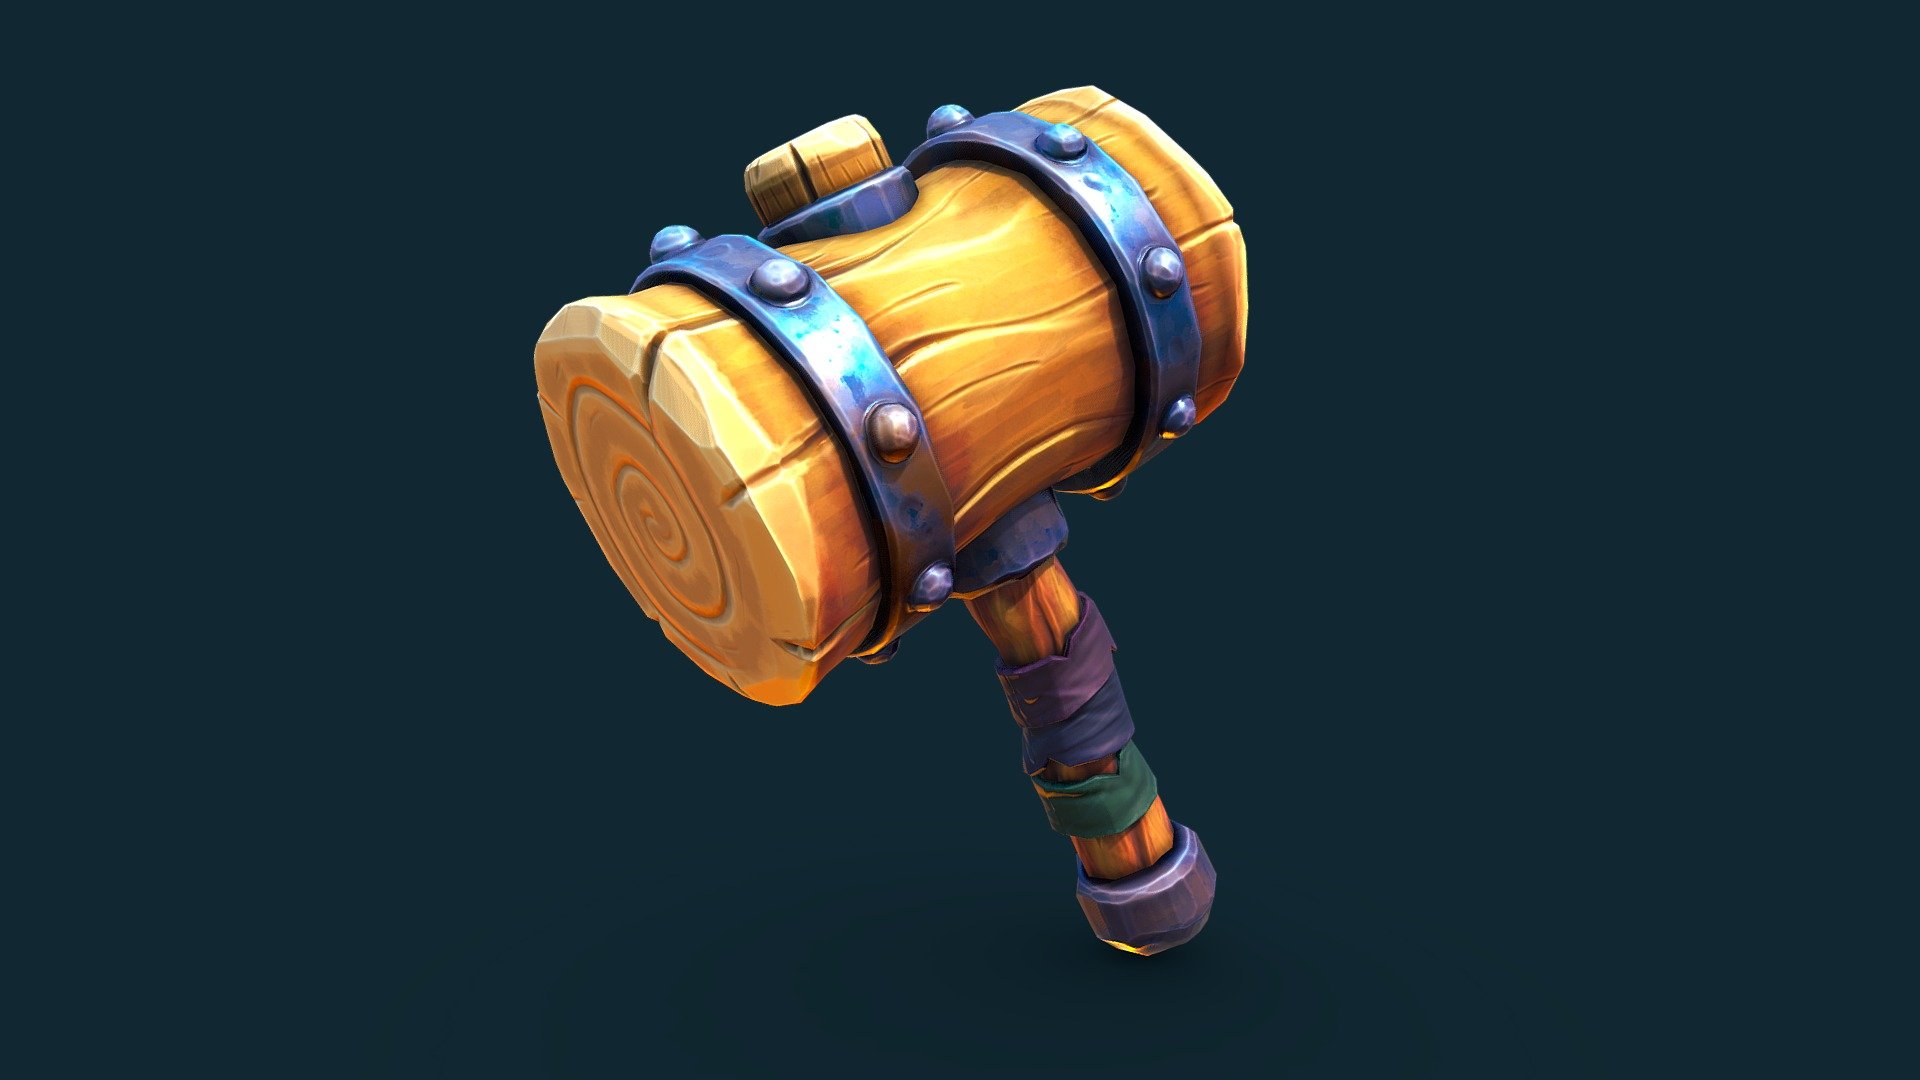 Game ready stylised hammer prop, can be used immediately for any game, with high qaulity texture work.

Project focusing on sculpting and baking processess to achieve high qaulity results whilst remaining effiecient for games 3d model